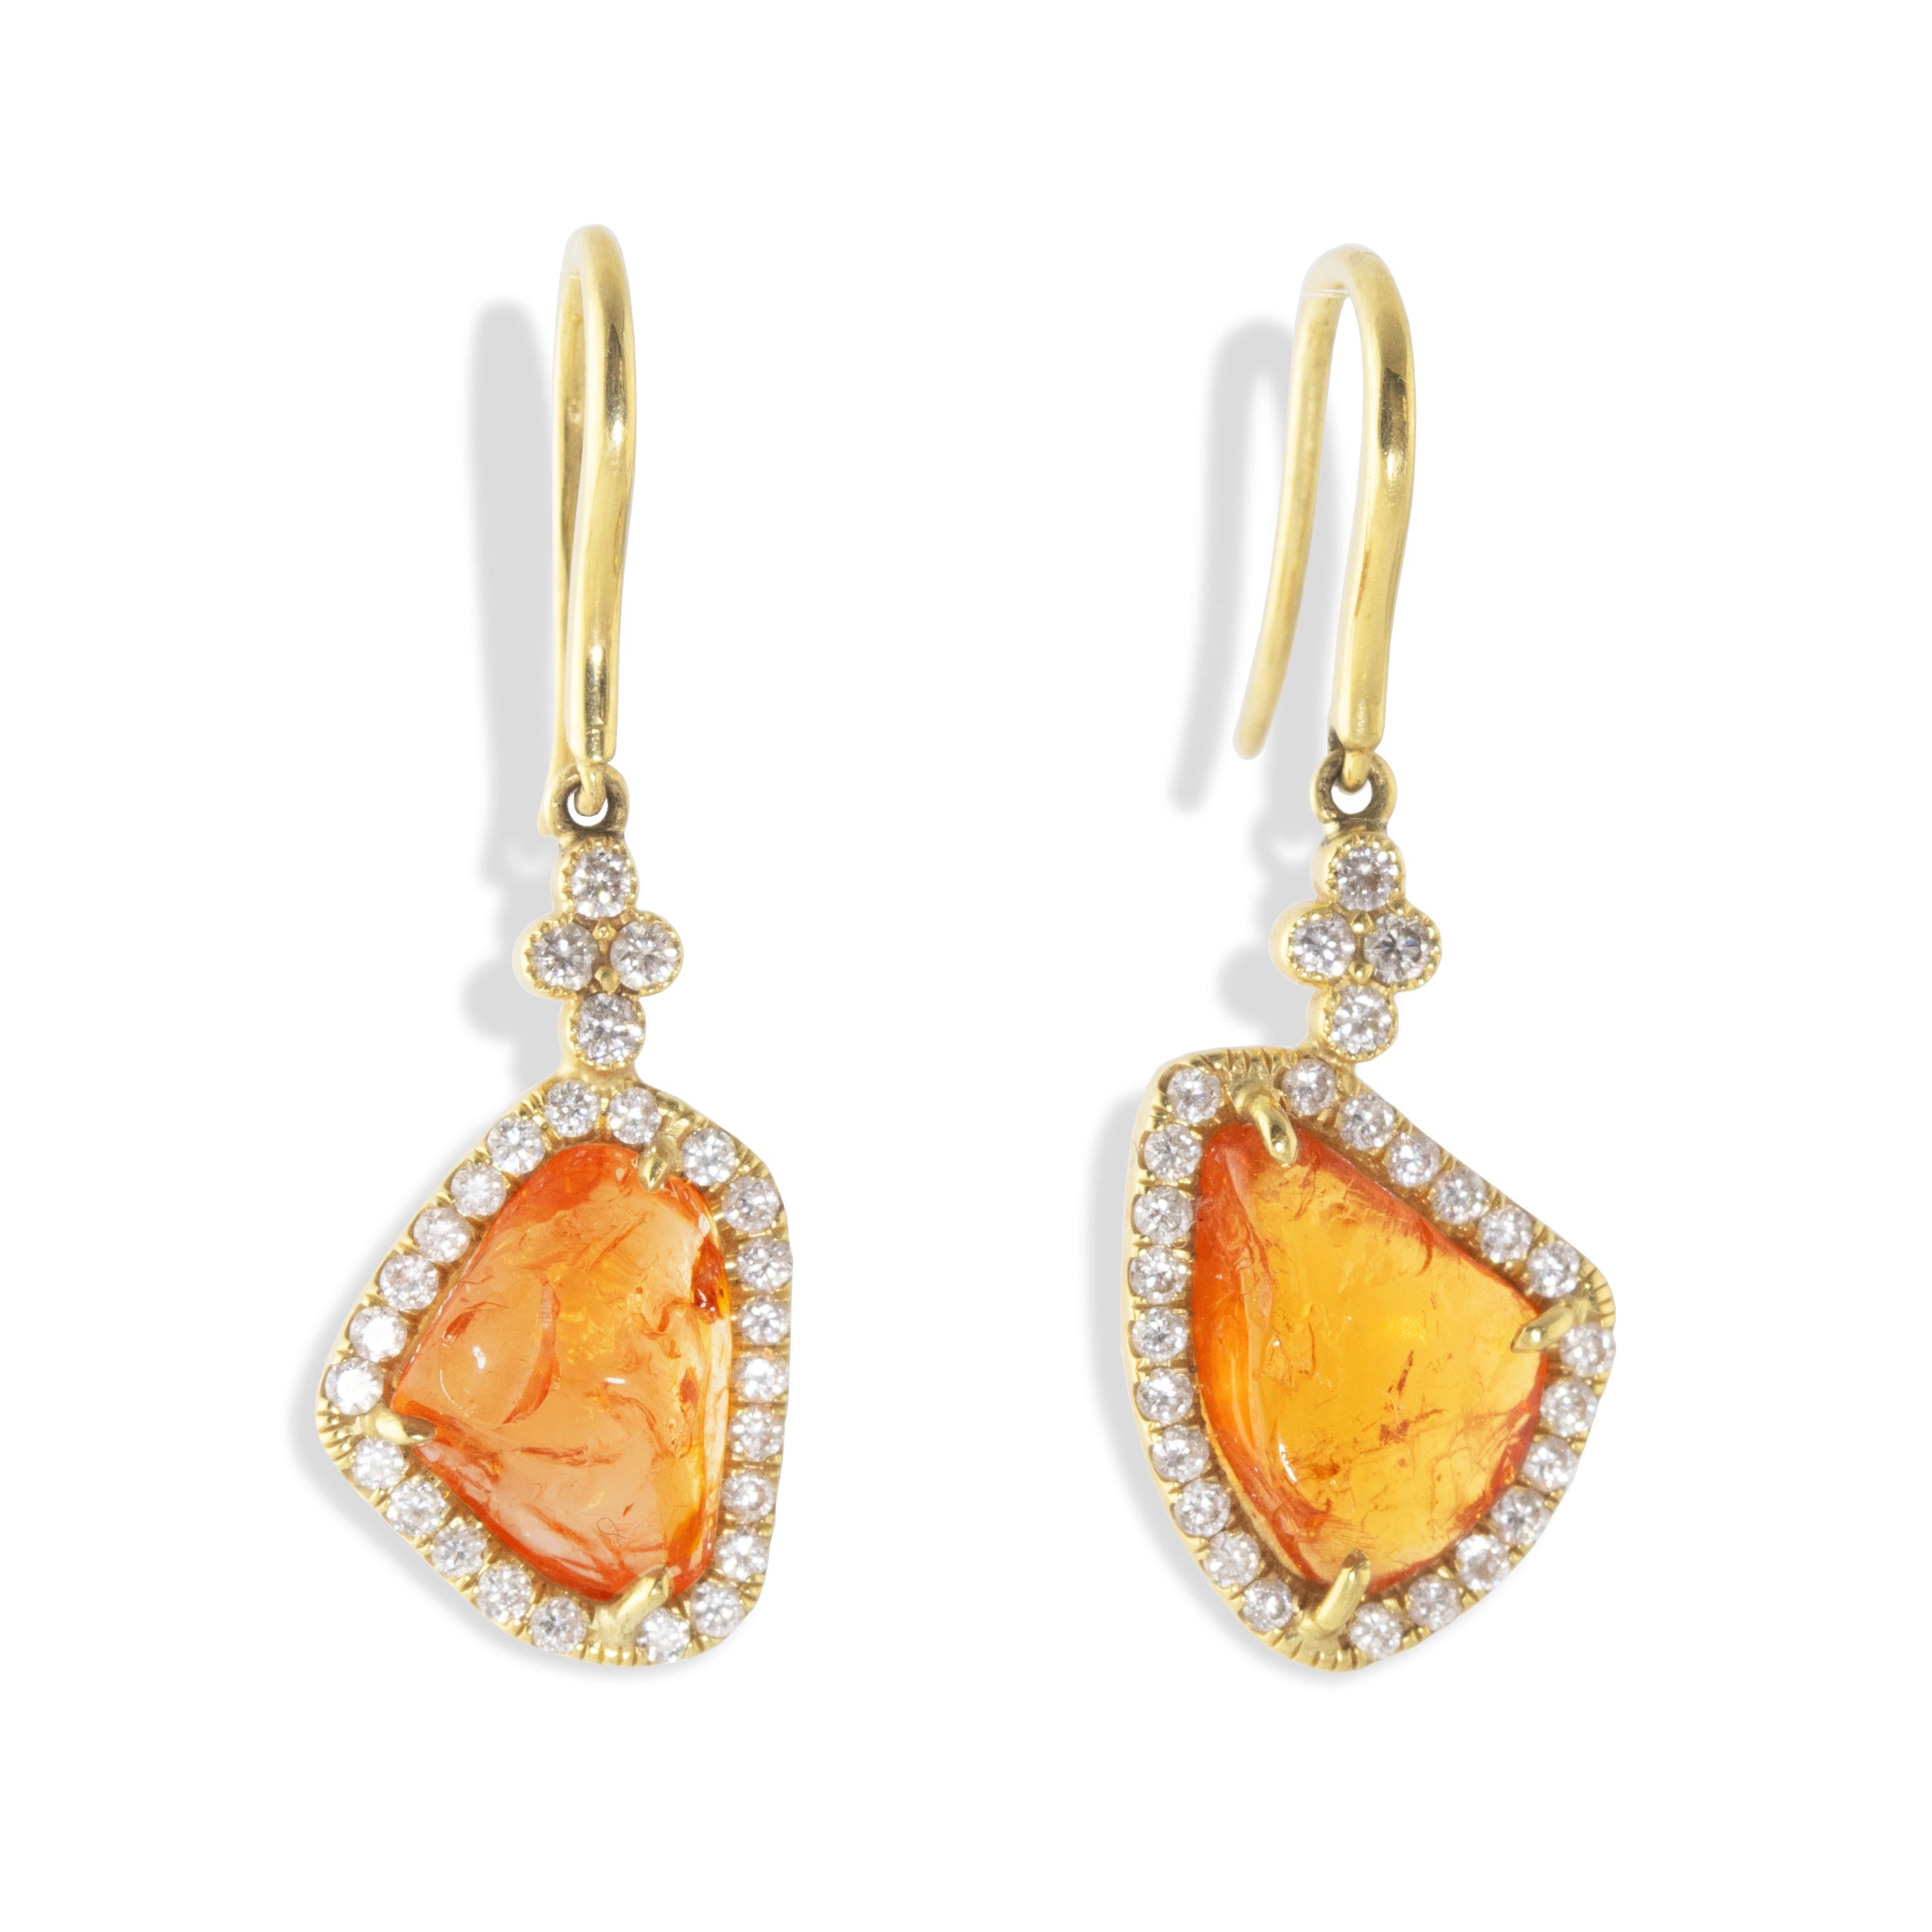 Raw Spessartite Orange Garnet gemstone diamond earrings.  Designed as part of the Wave Collection, the bright orange centers are framed in diamonds with a diamond clover at the top. Featuring 5 carats of raw Orange garnet, surrounded with diamonds